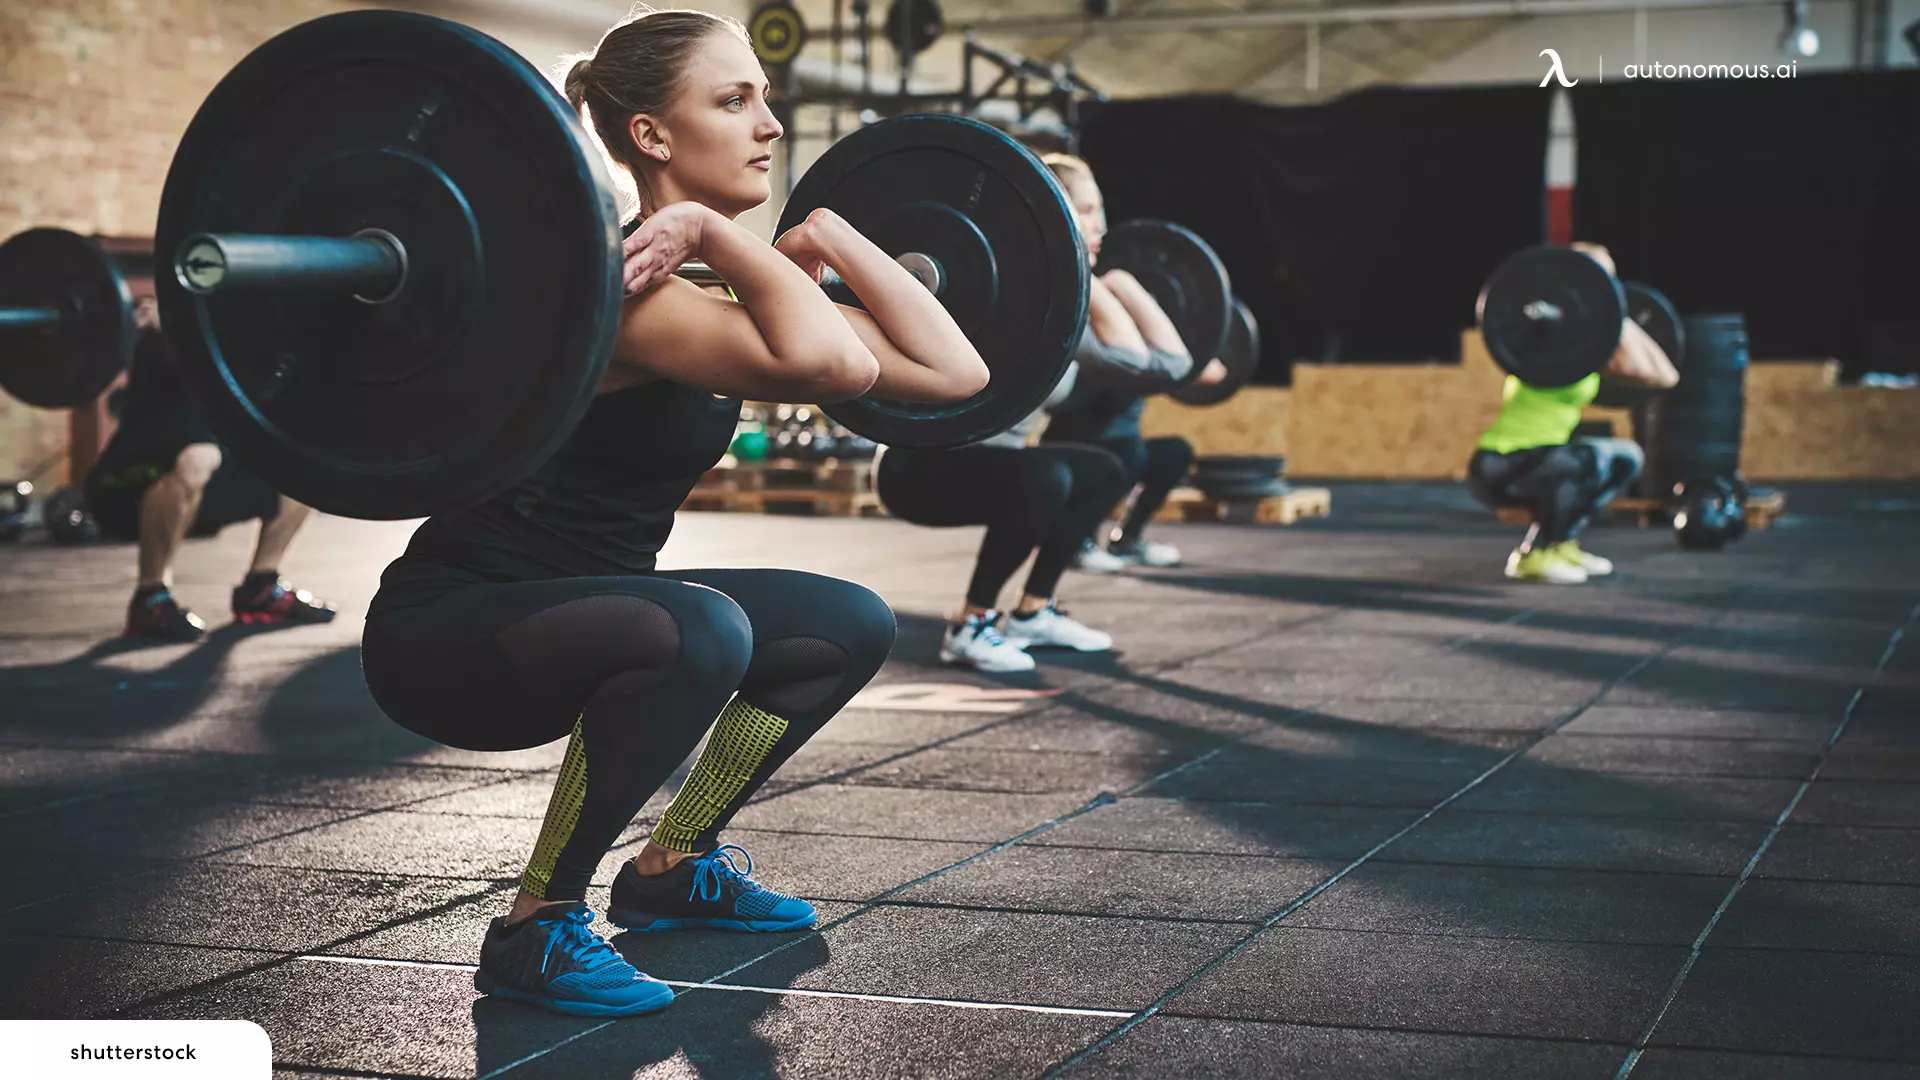 Weight Lifting Makes You Bulky - fitness myths